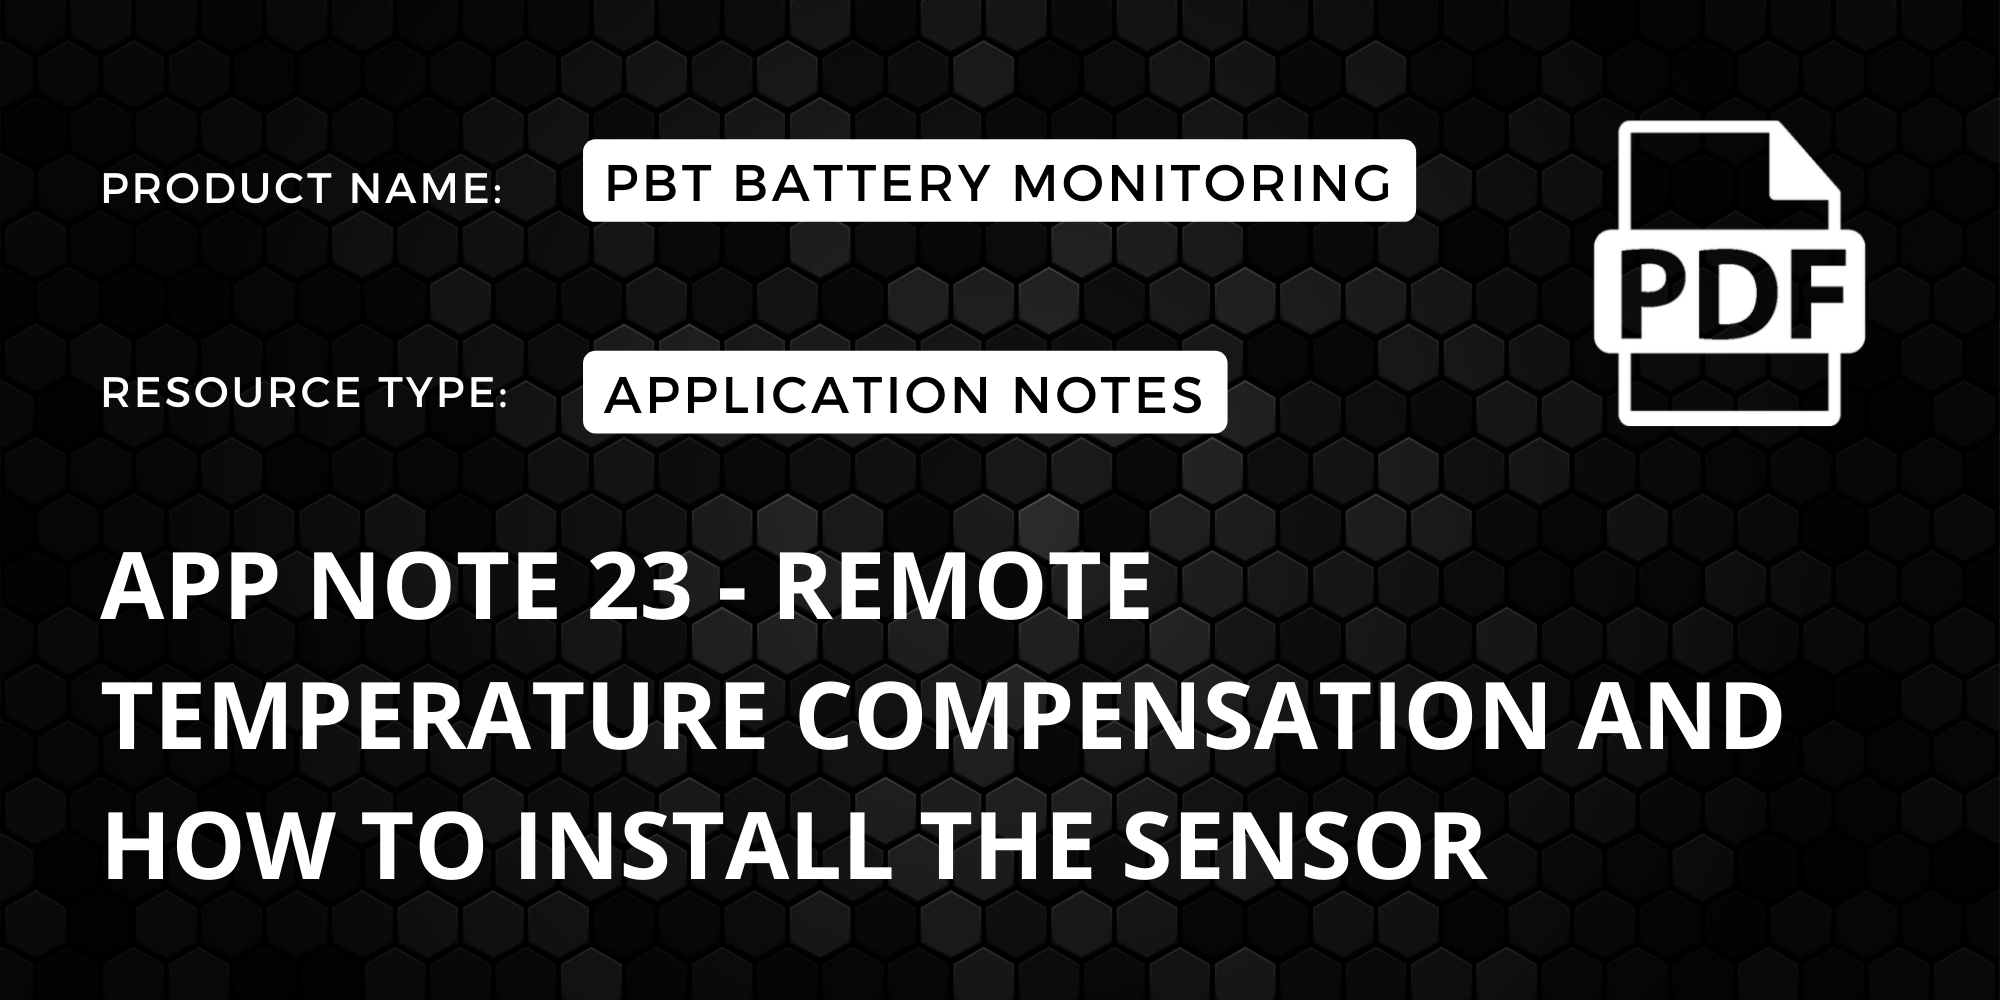 App Note 23 - Remote Temperature Compensation and How to Install the Sensor